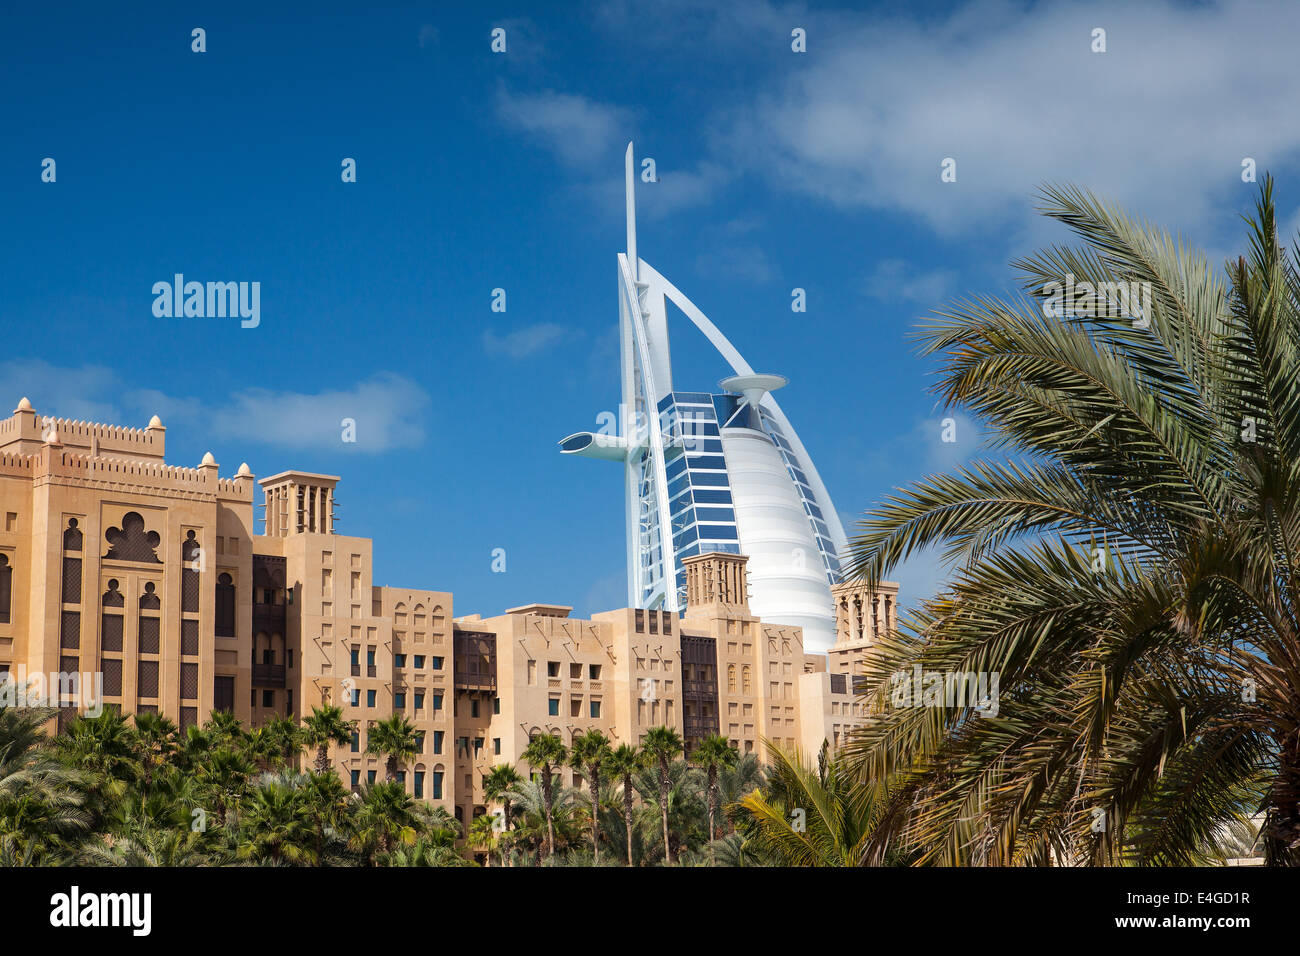 DUBAI-FEBRUARY 3,2012:View of the Souk Madinat Jumeirah.Madinat Jumeirah contain two hotels and clusters of 29 typical Arabic ho Stock Photo